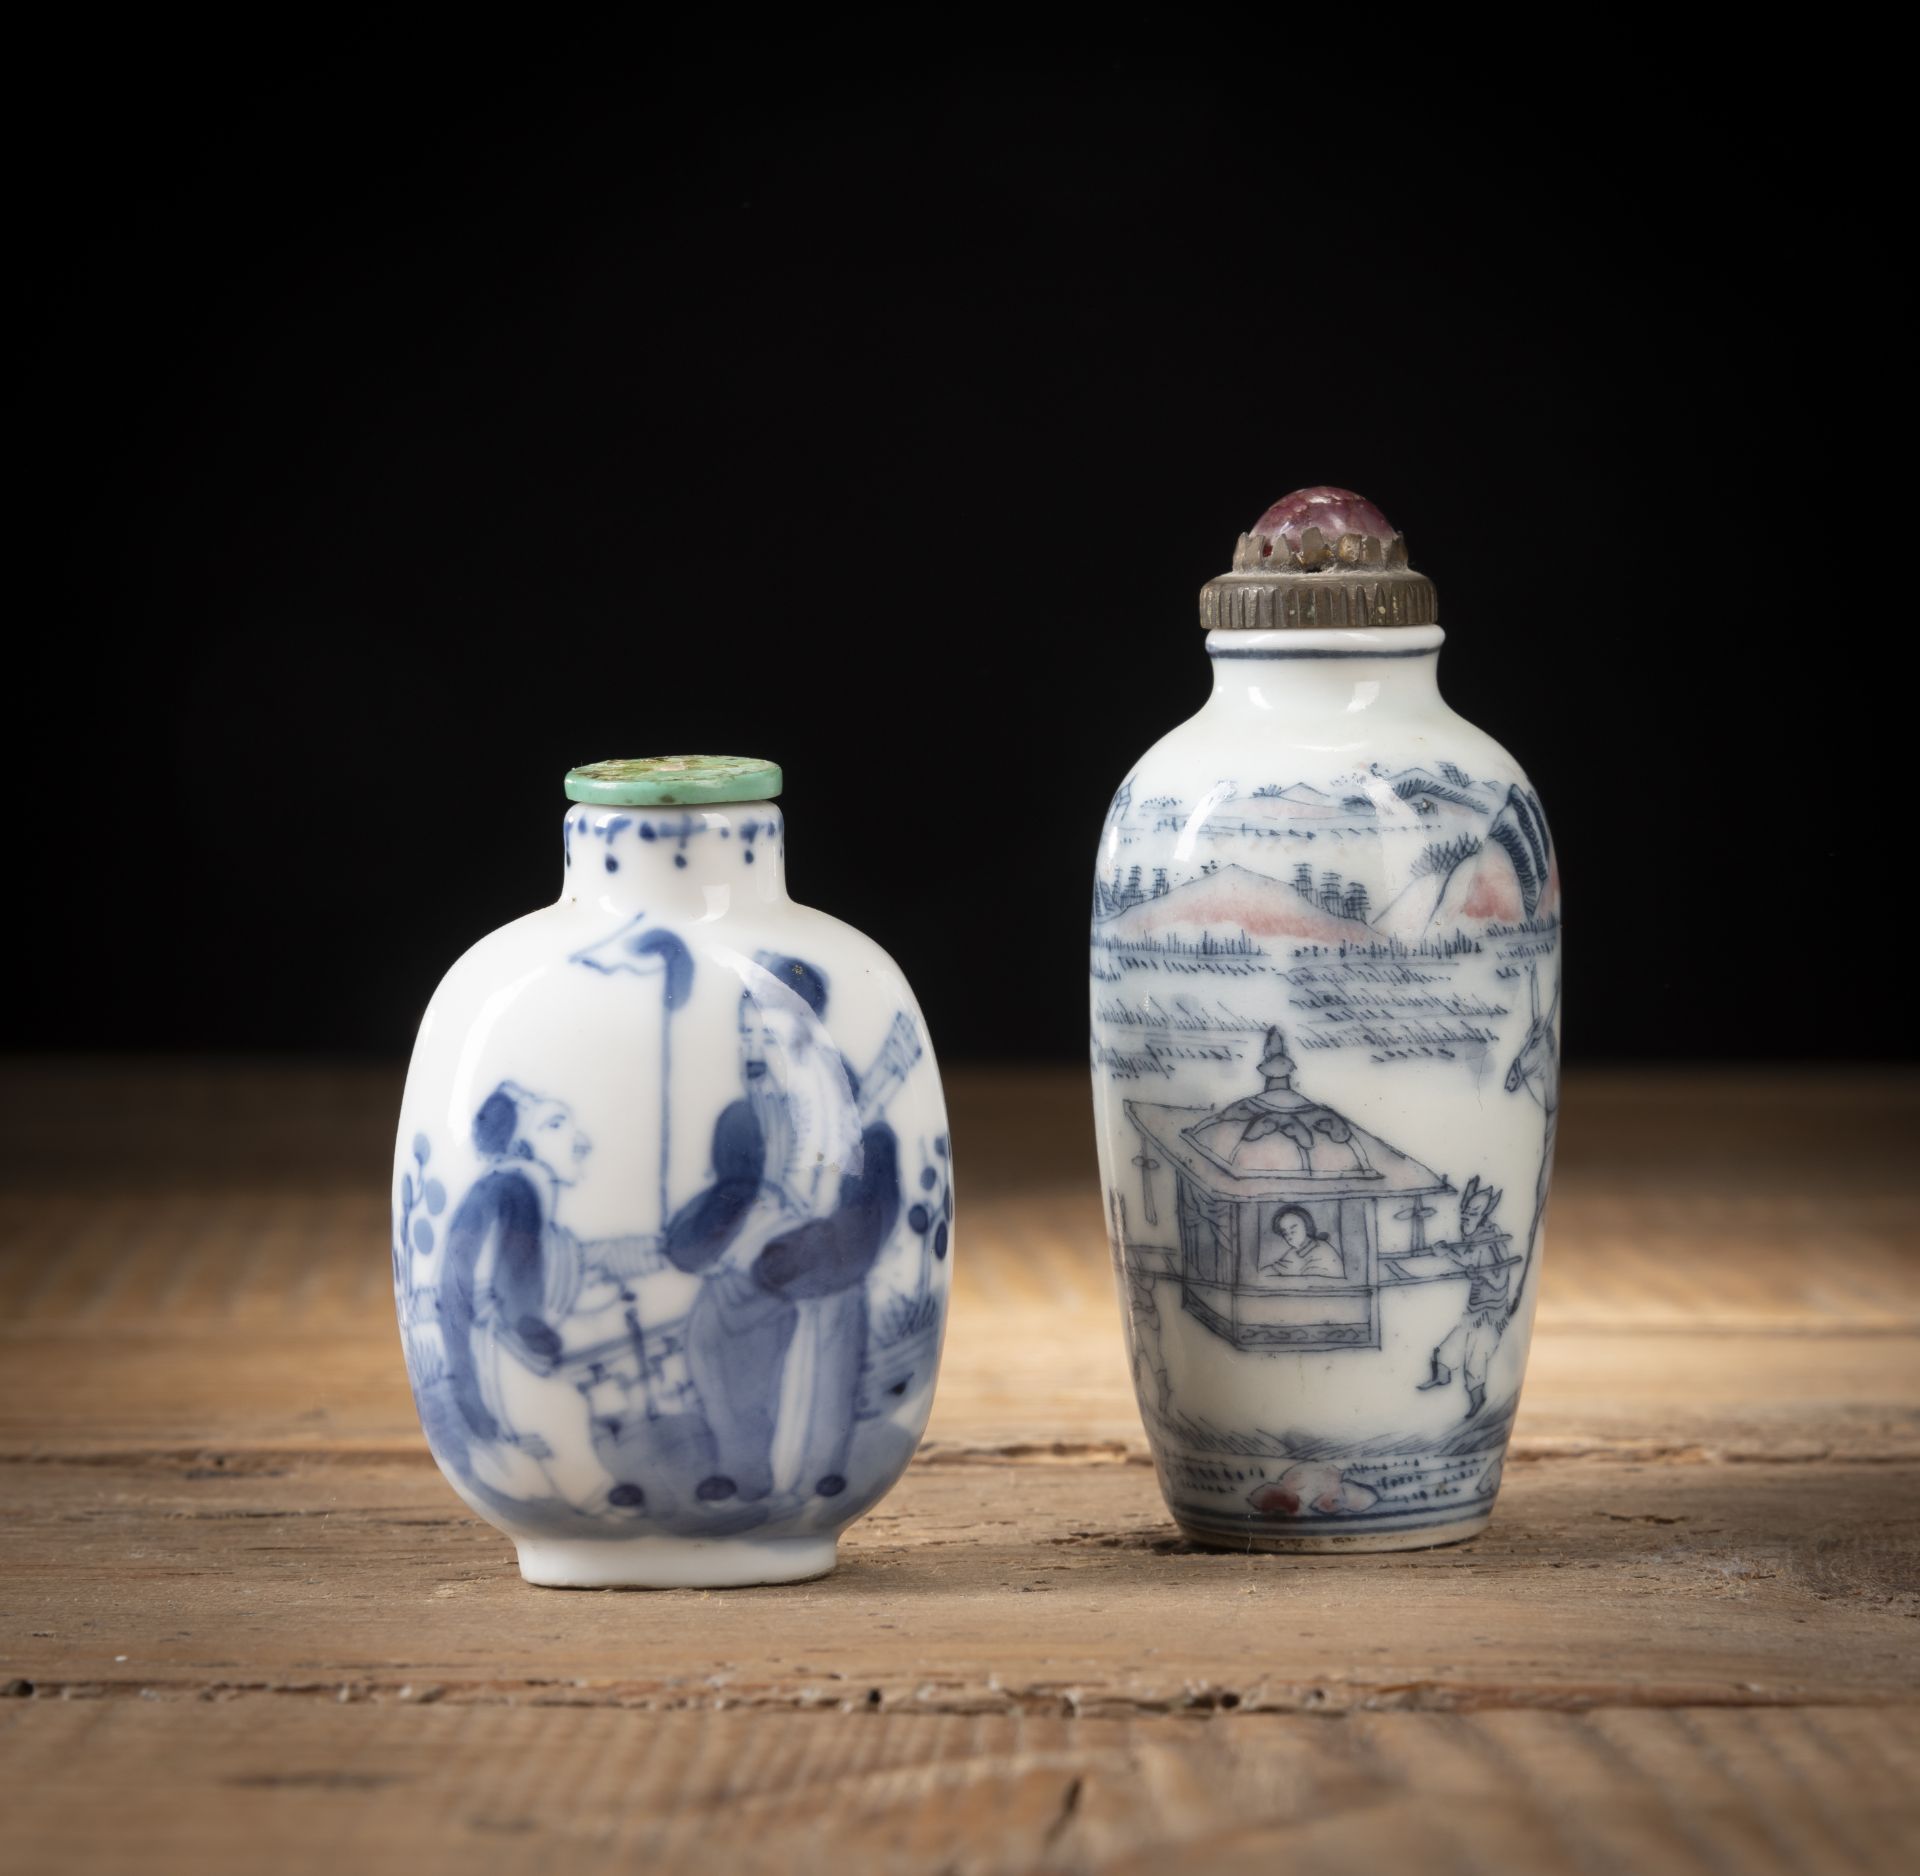 TWO BLUE AND WHITE PORCELAIN SNUFF BOTTLES DEPICTING THE WEDDING OF ZHONG KUI'S SISTER AND A MEETIN